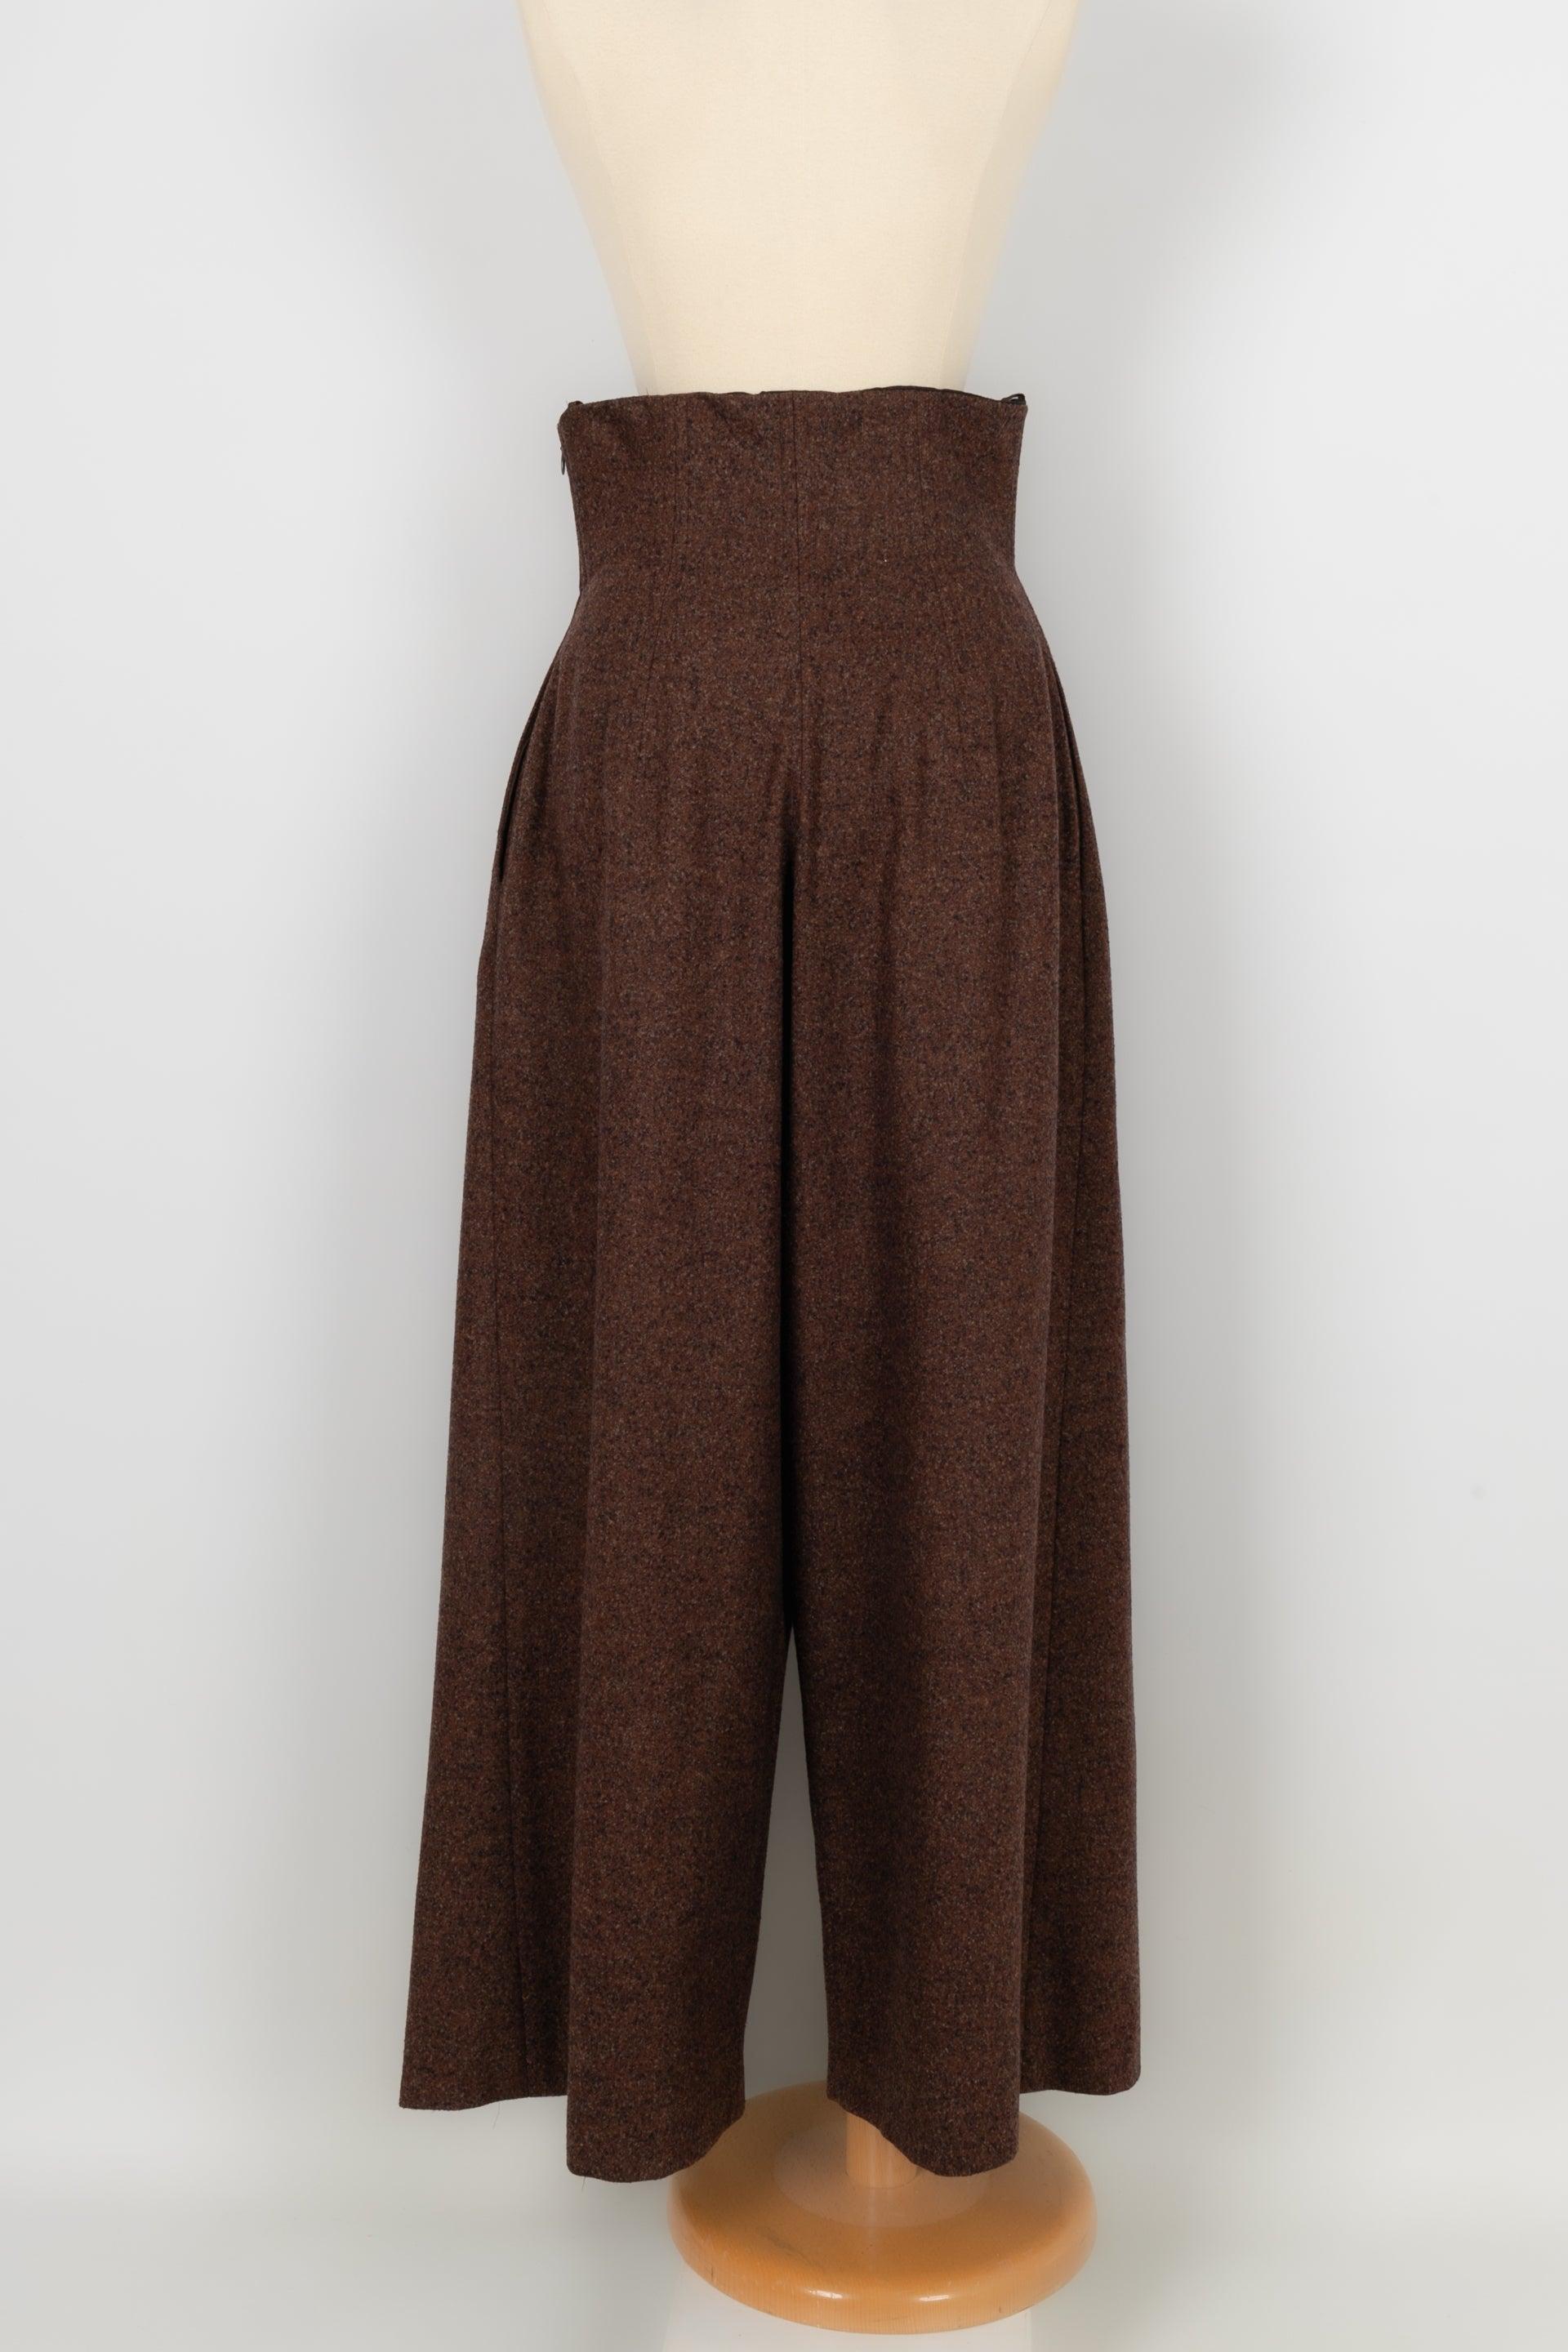 Christian Lacroix Blended Wool High-Waisted Pants Winter, 1993 In Excellent Condition For Sale In SAINT-OUEN-SUR-SEINE, FR